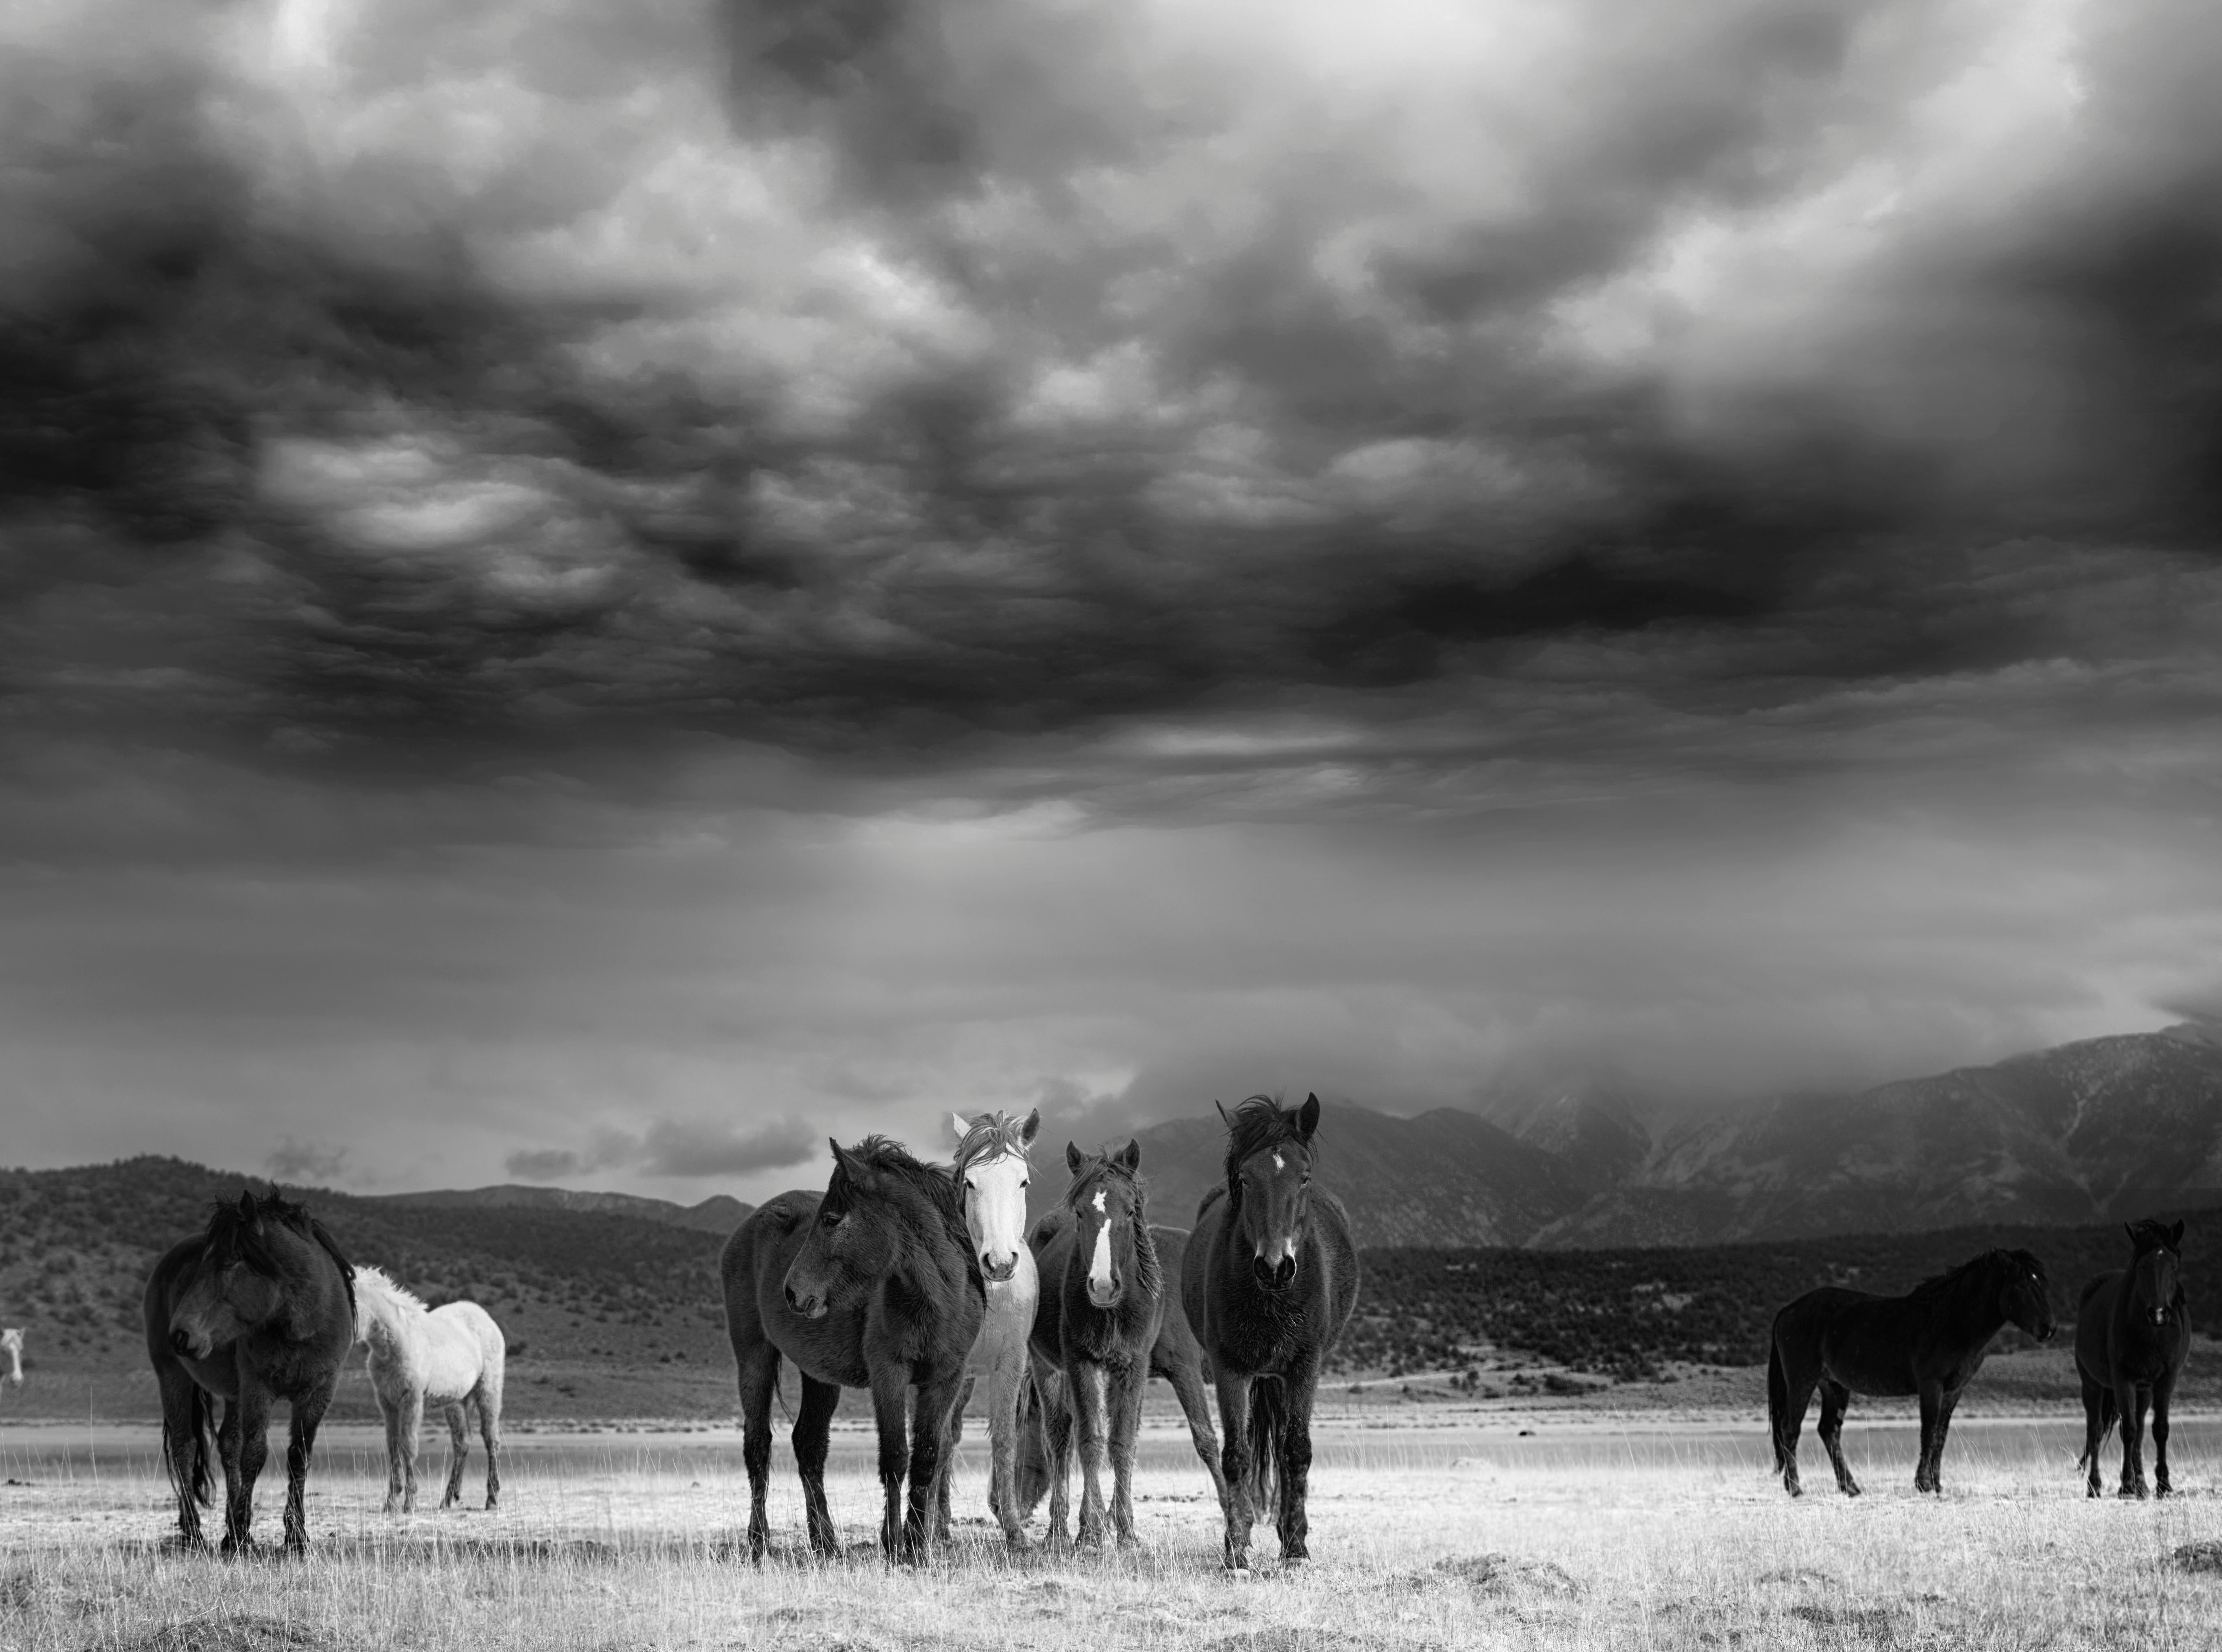 Shane Russeck Animal Print - "The Calm" 36x48  Black and White Photography of Wild Horses Mustangs  Unsigned